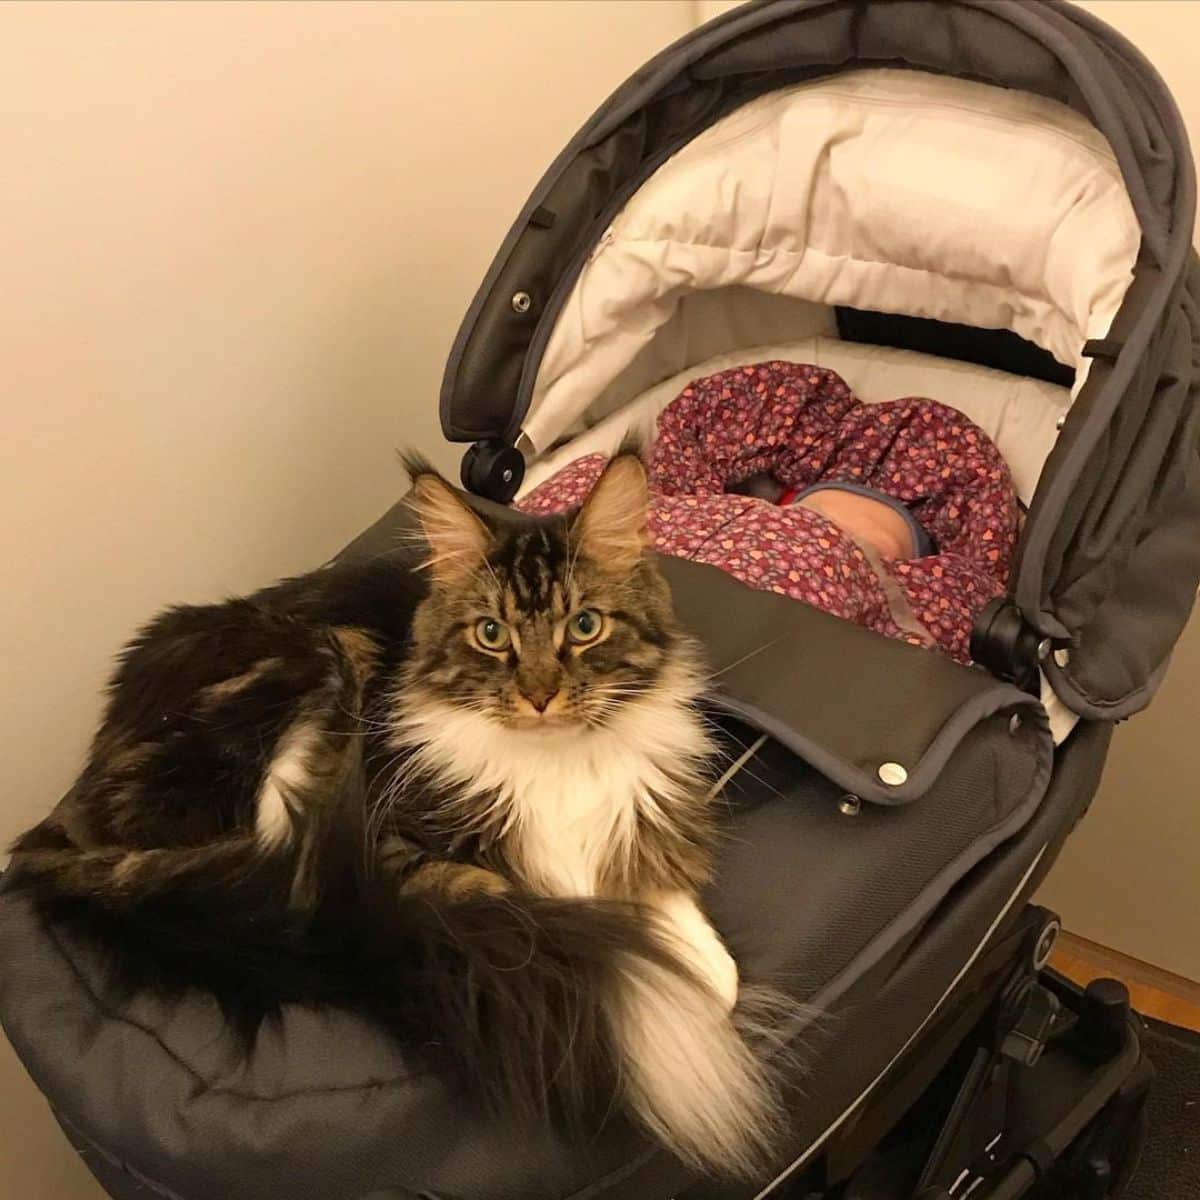 A tabby fluffy maine coon sitting and guarding a baby in a stroller.